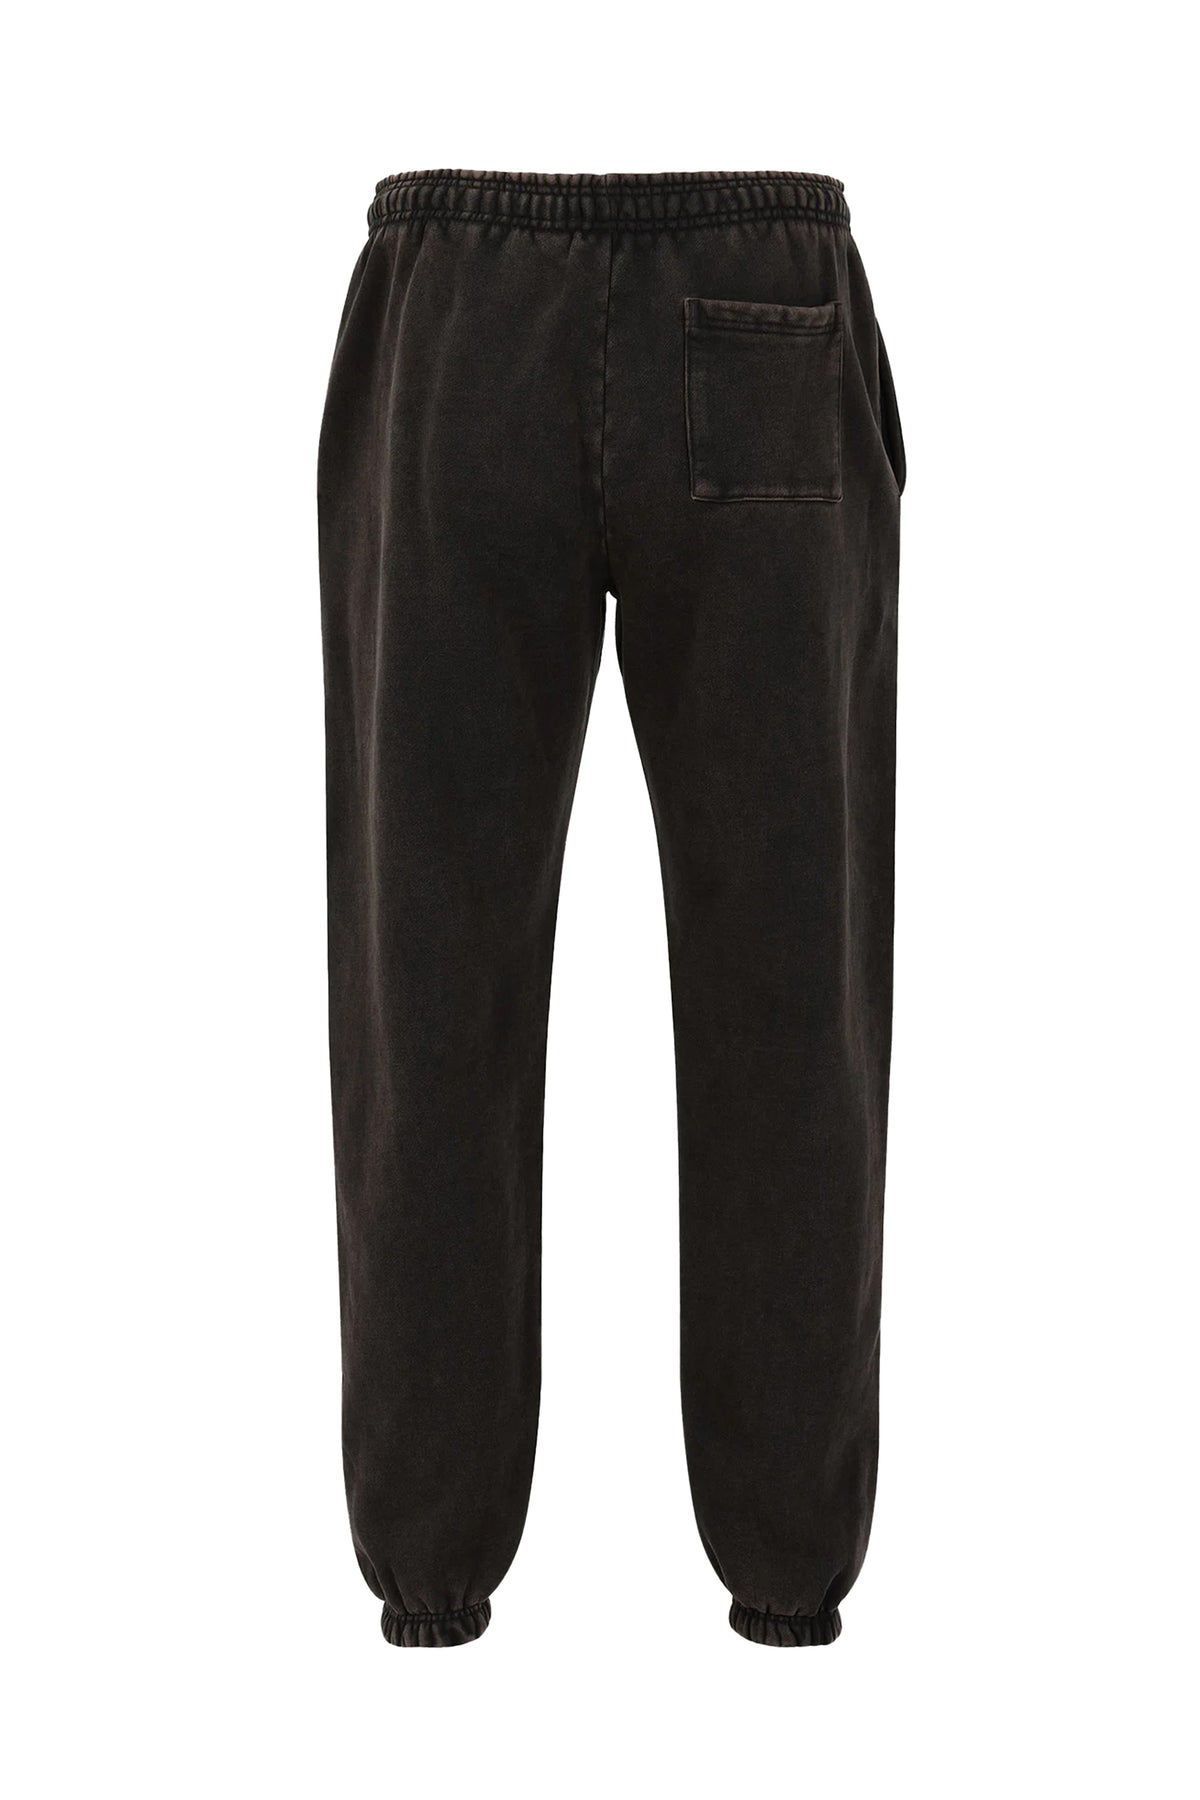 HEAVY SWEATPANT / WASHED BLK